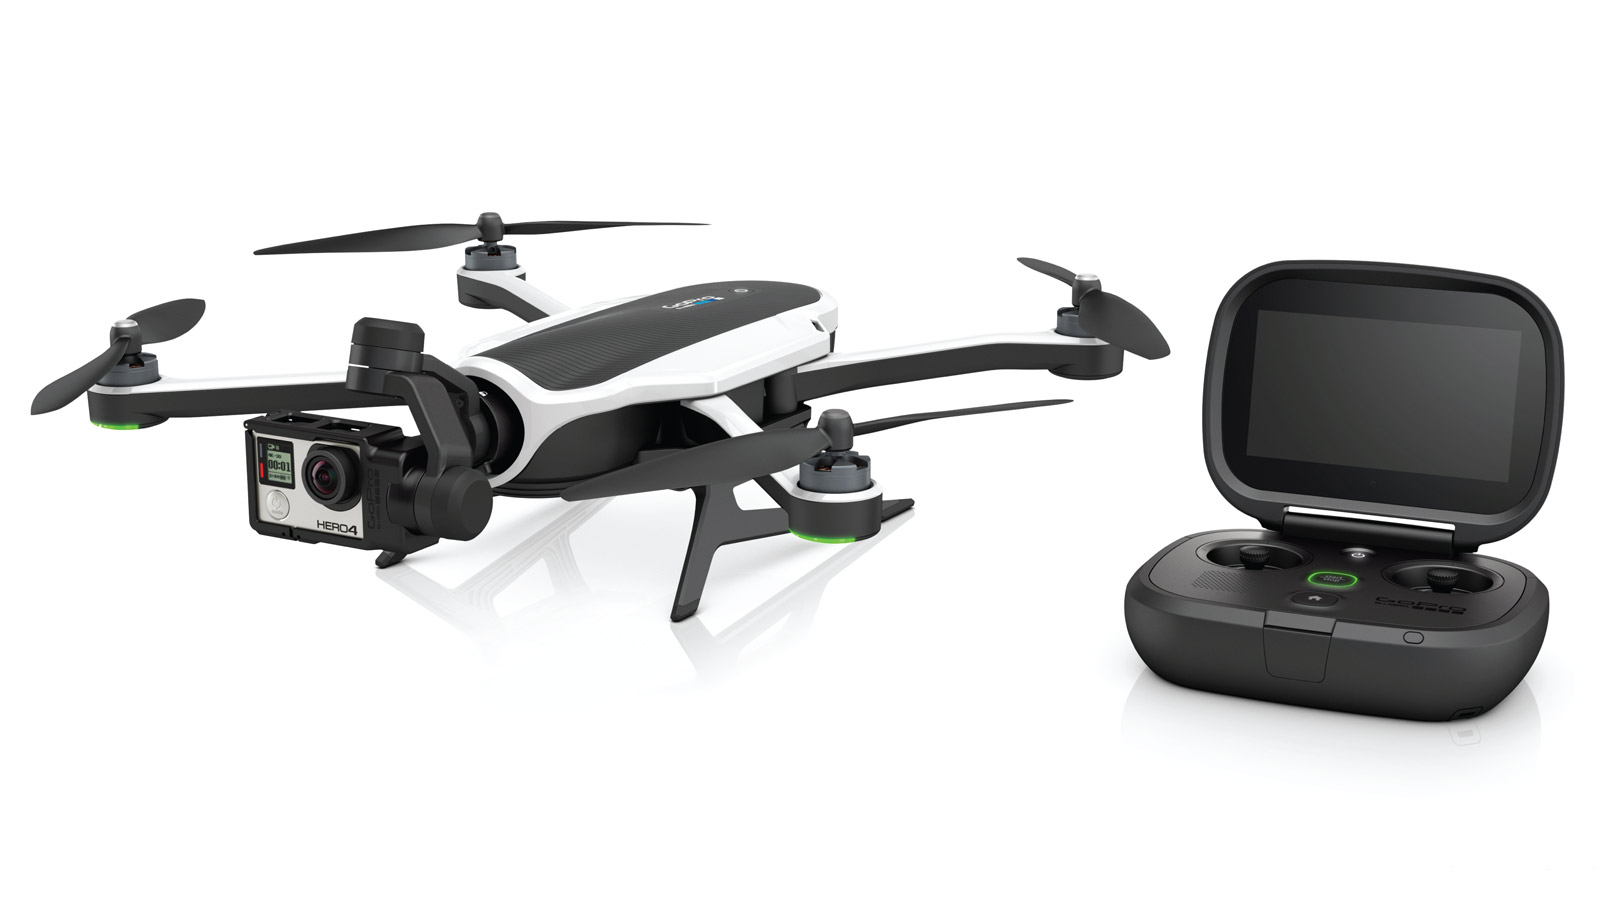 Bad News for GoPro: Karma Drone Recall Announced | CineD